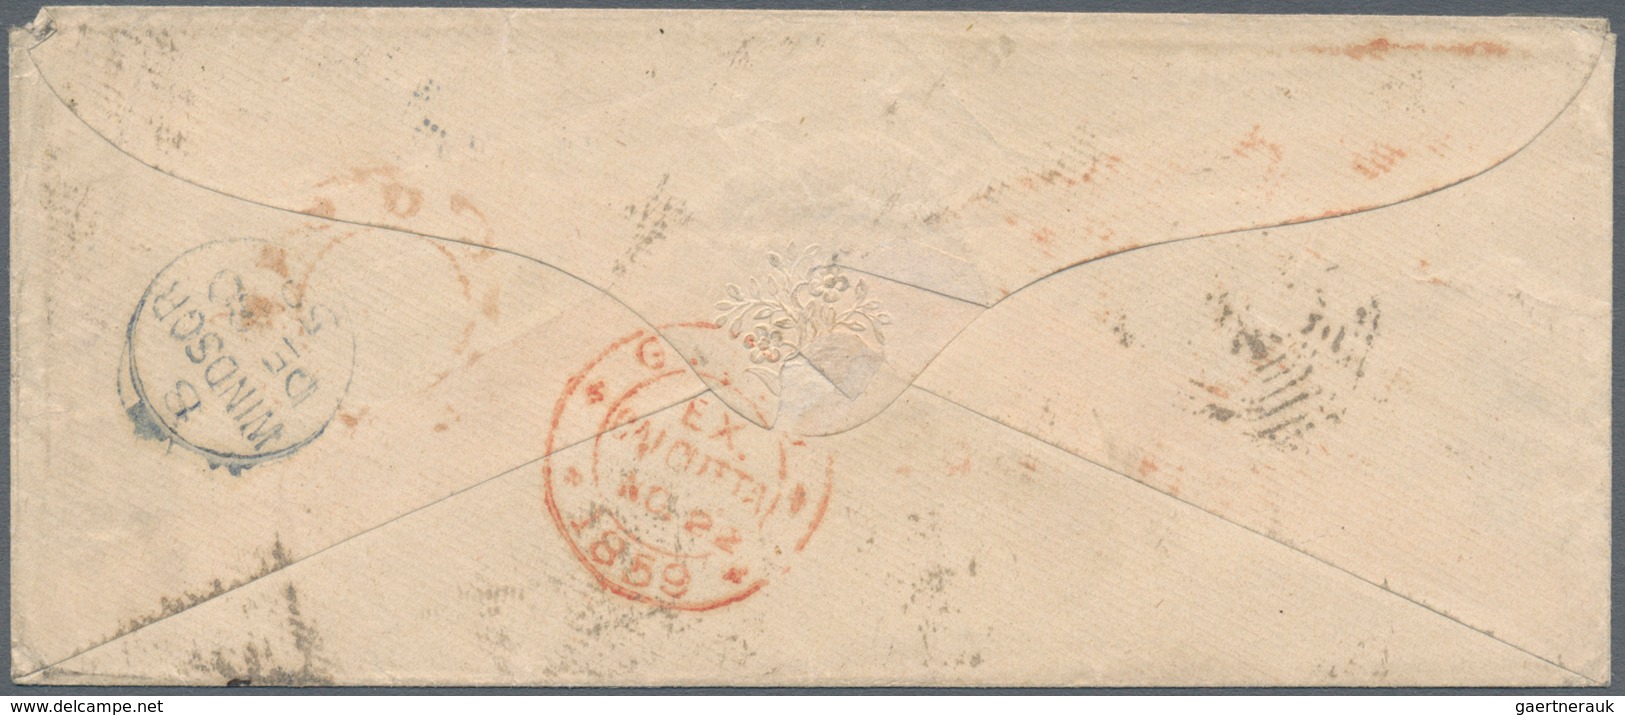 08697 Indien: 1854/64, covers (5) used to England x4 (Calcutta) and within India x1 (Jessore), also uprate